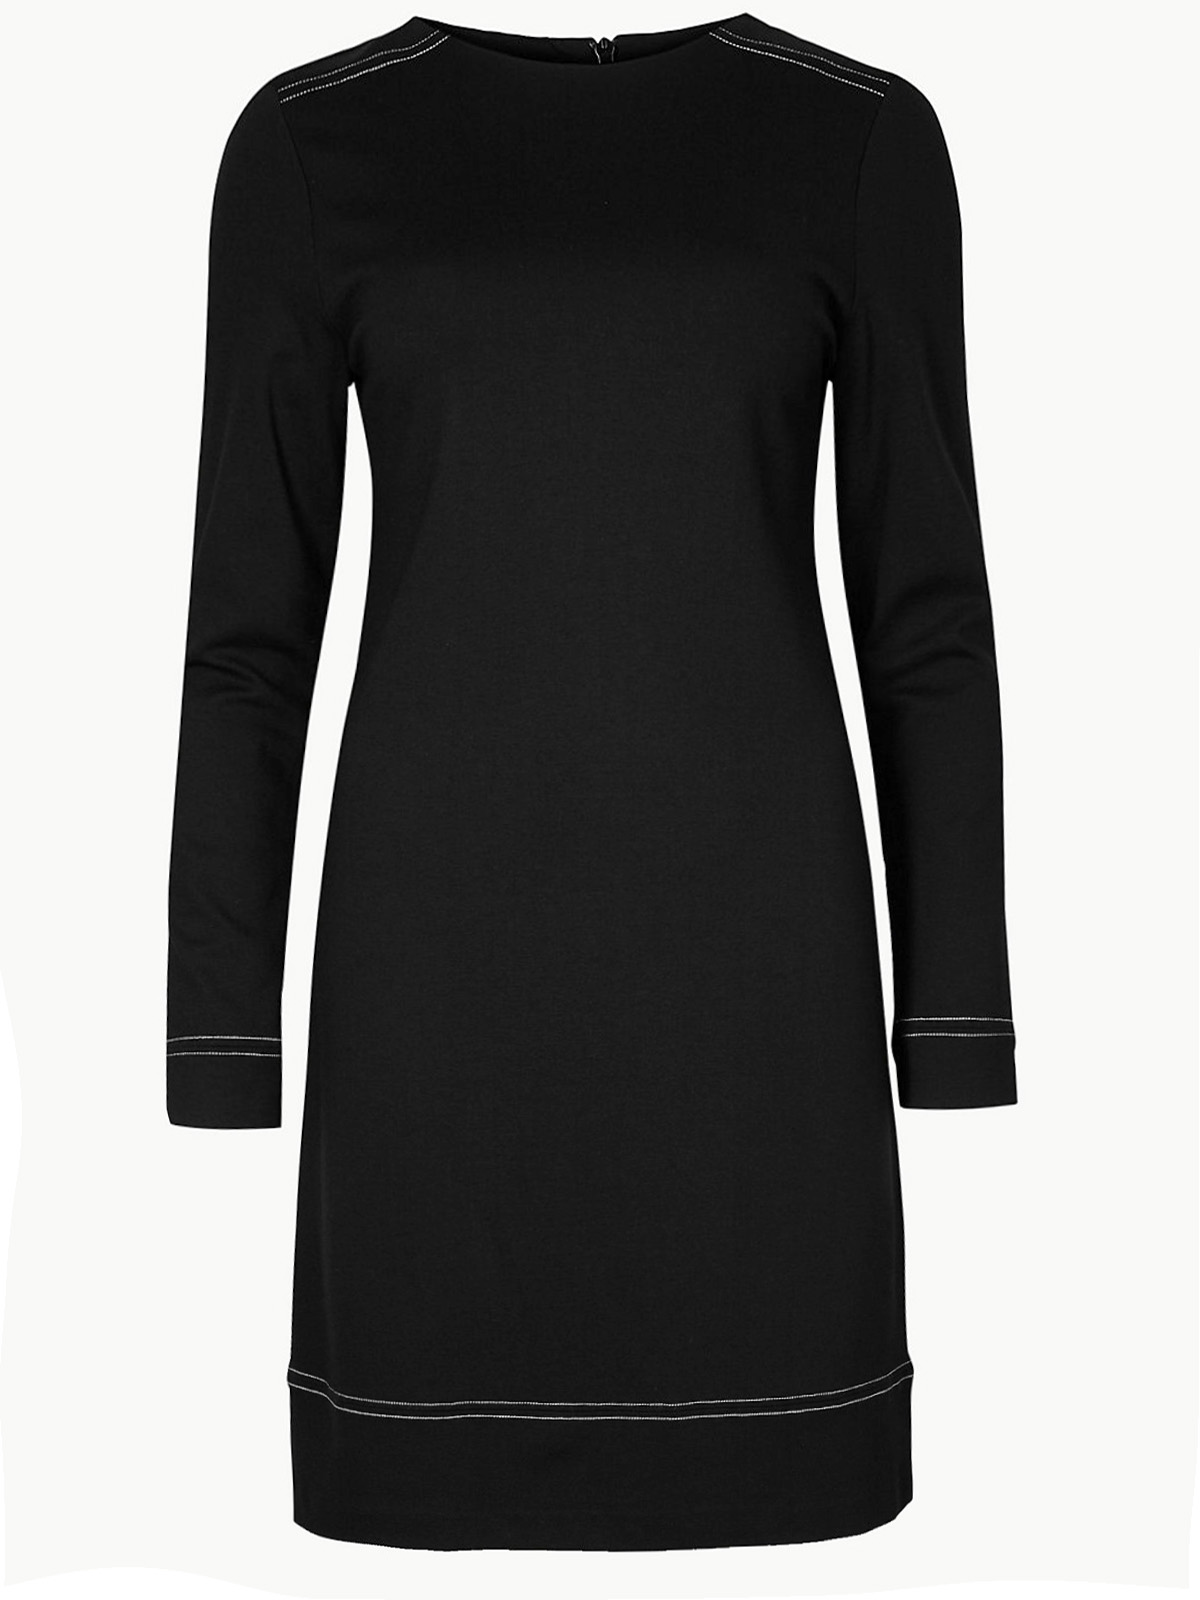 Marks and Spencer - - M&5 BLACK Long Sleeve Shift Dress - Size 8 to 20